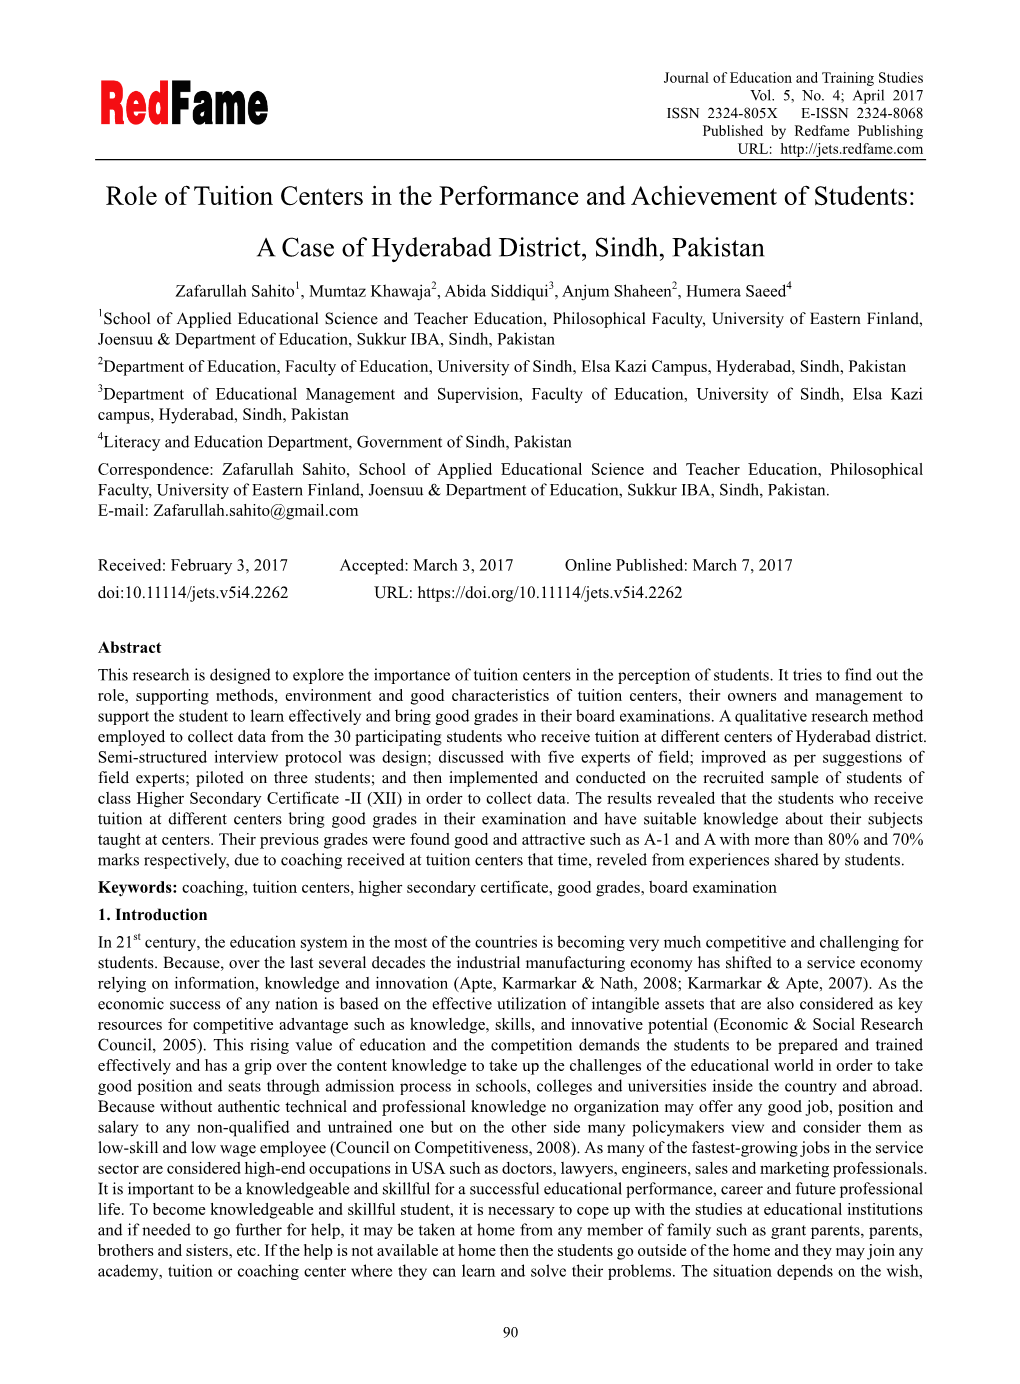 Role of Tuition Centers in the Performance and Achievement of Students: a Case of Hyderabad District, Sindh, Pakistan